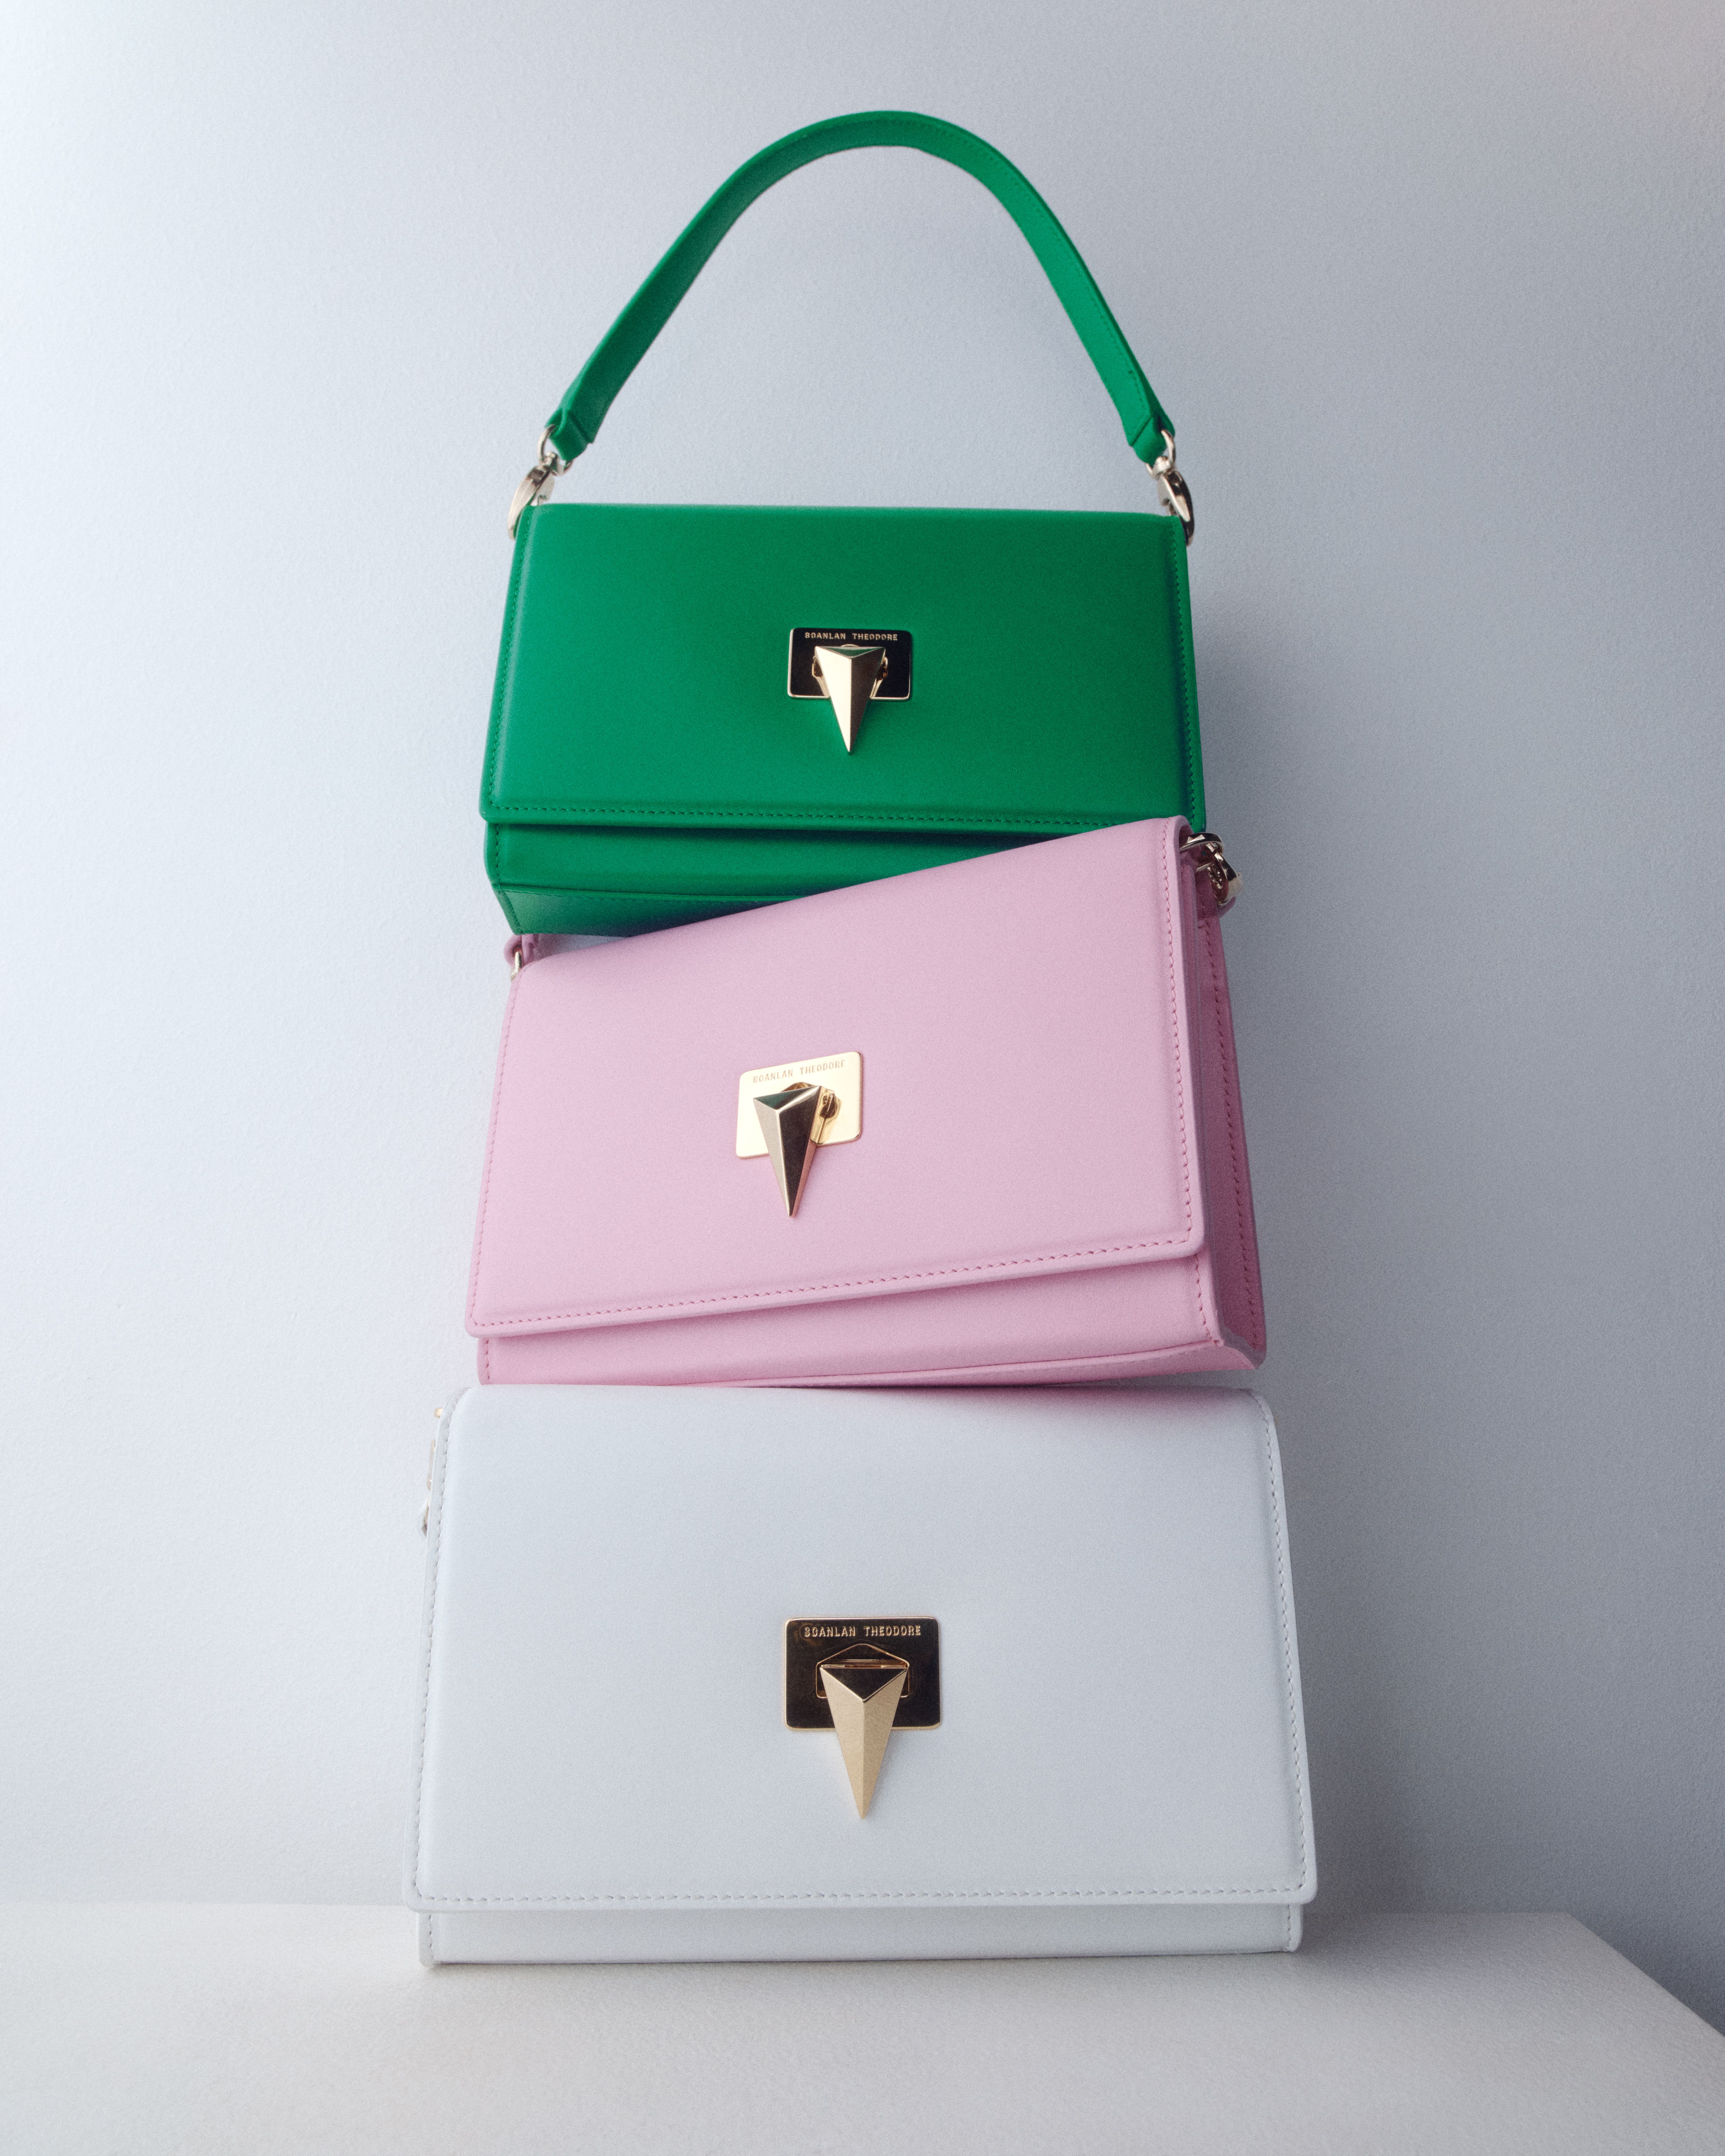 Three leather shoulder bags stacked on top of each other, with bright green at the top, light pink, then white